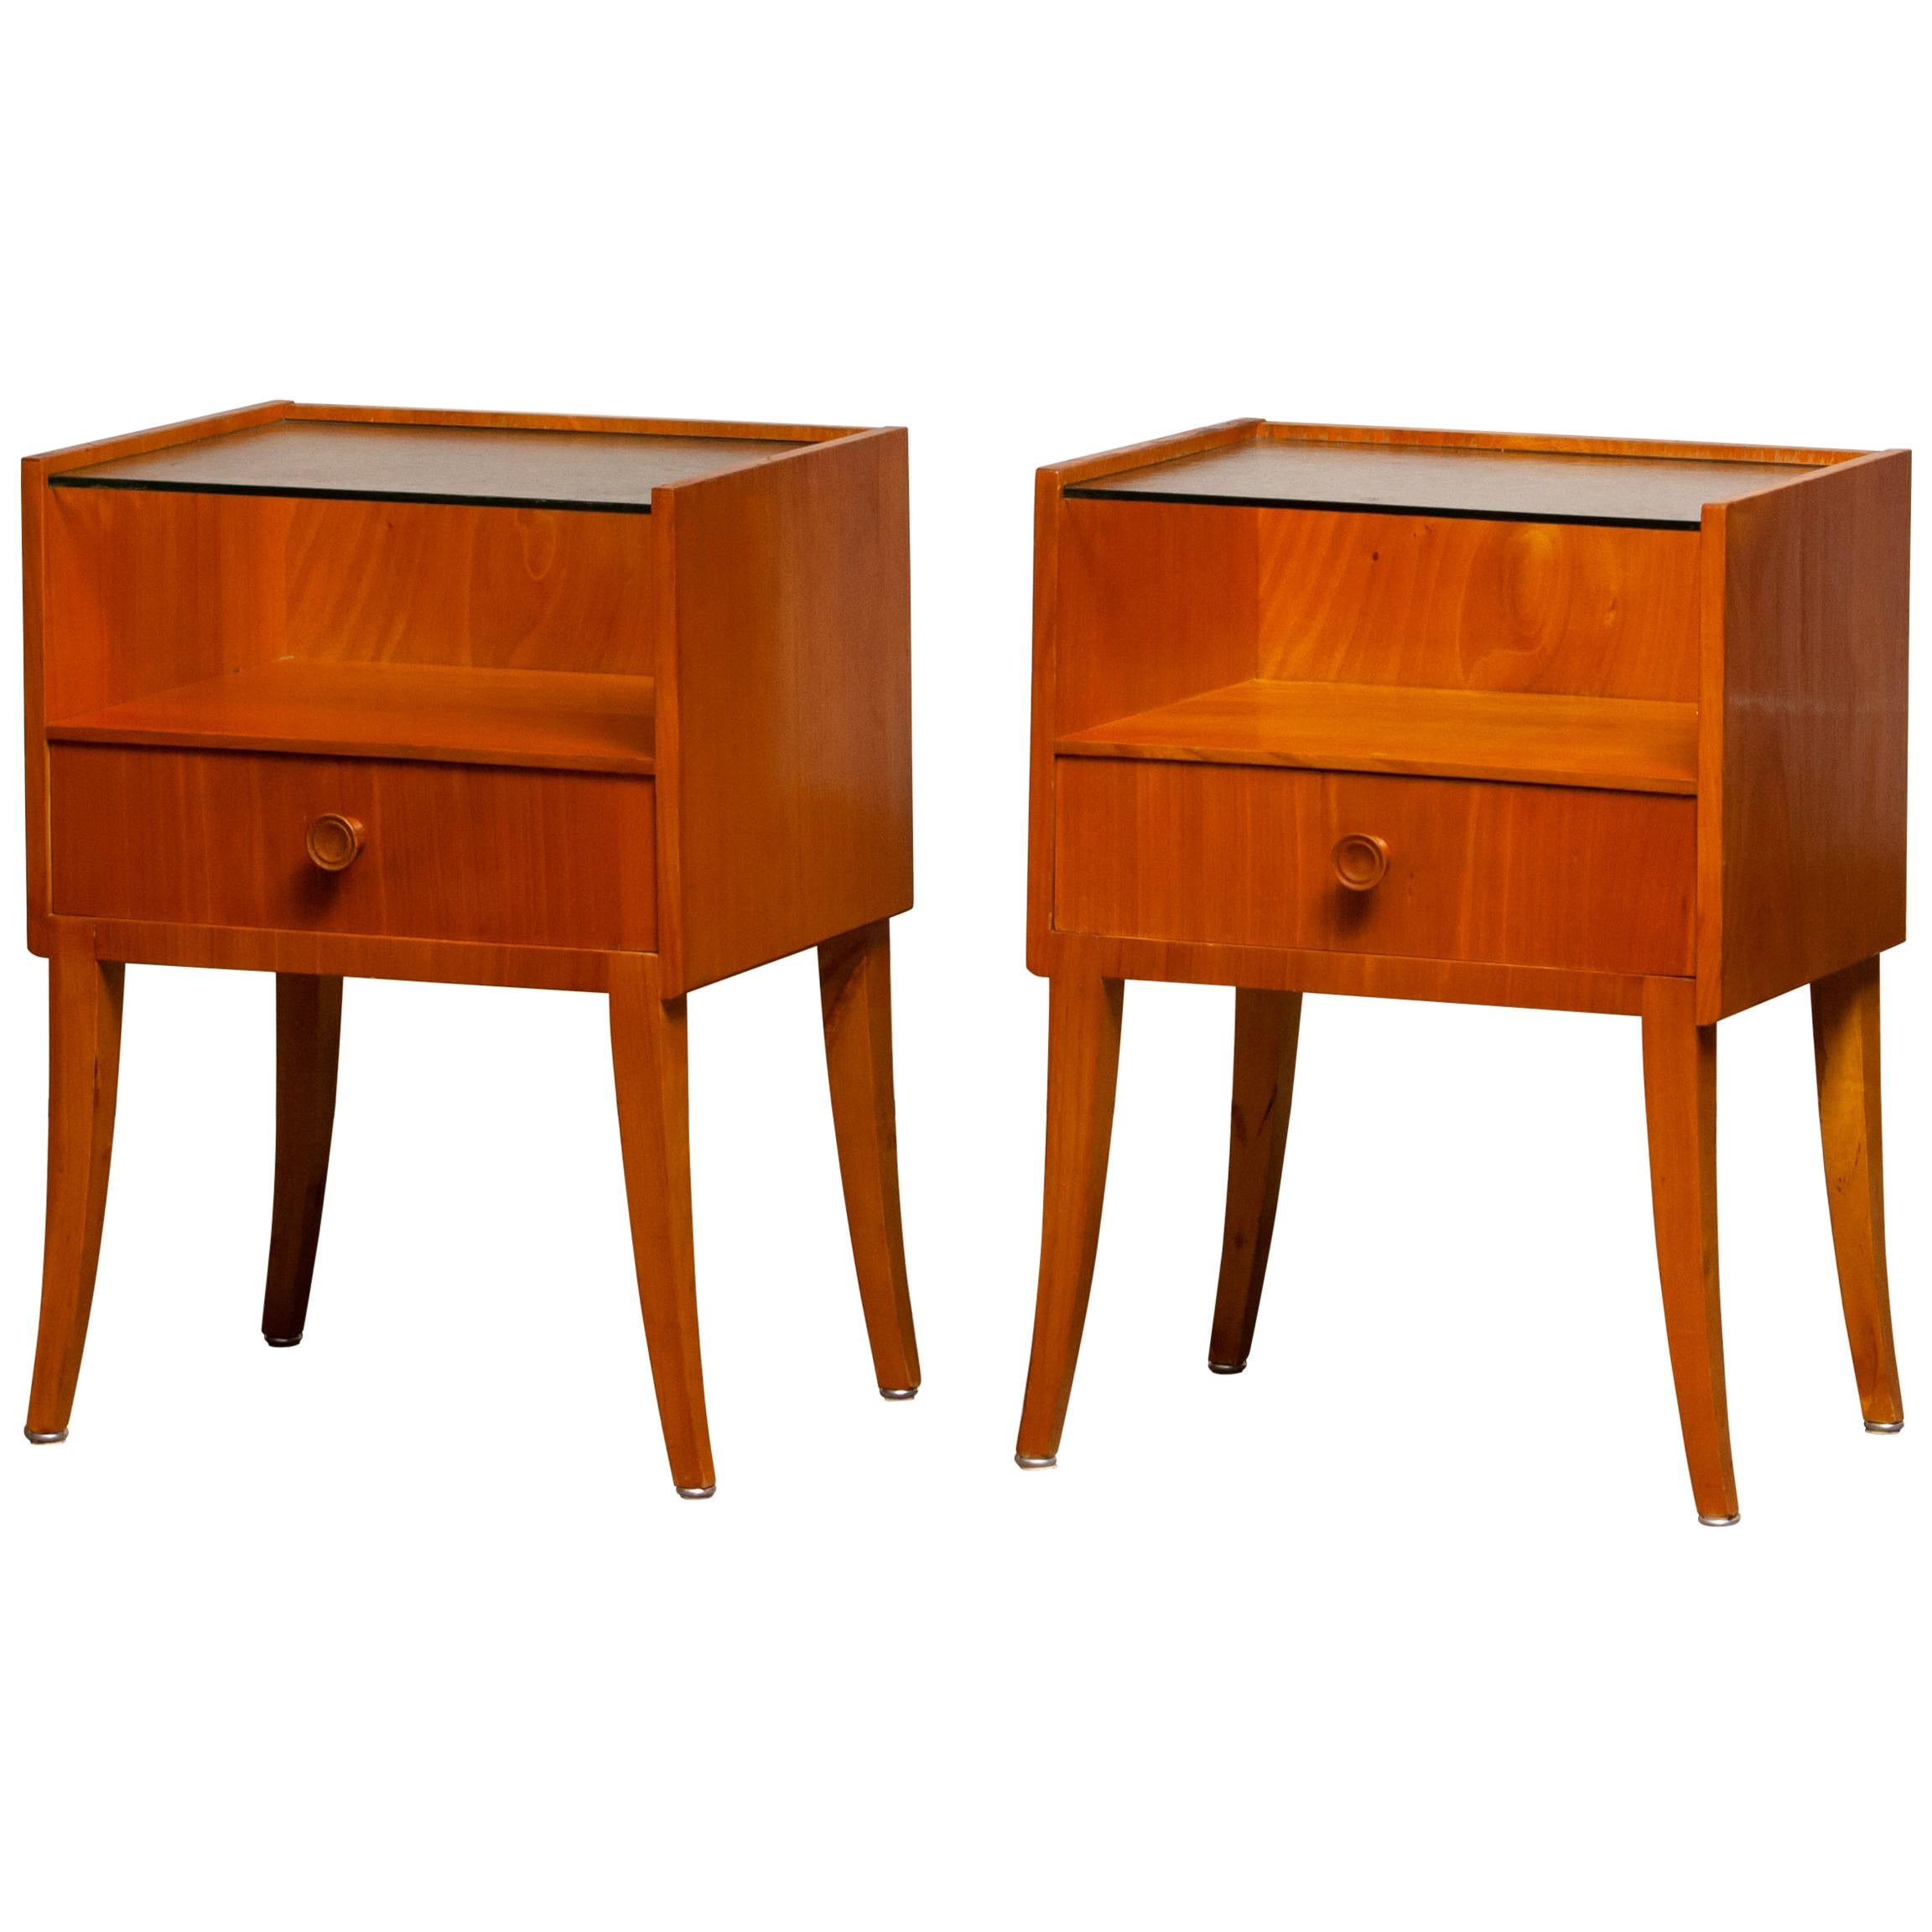 Scandinavian Modern 1950s Pair of Nightstands or Bedside Tables from Sweden in Elm with Glass Top